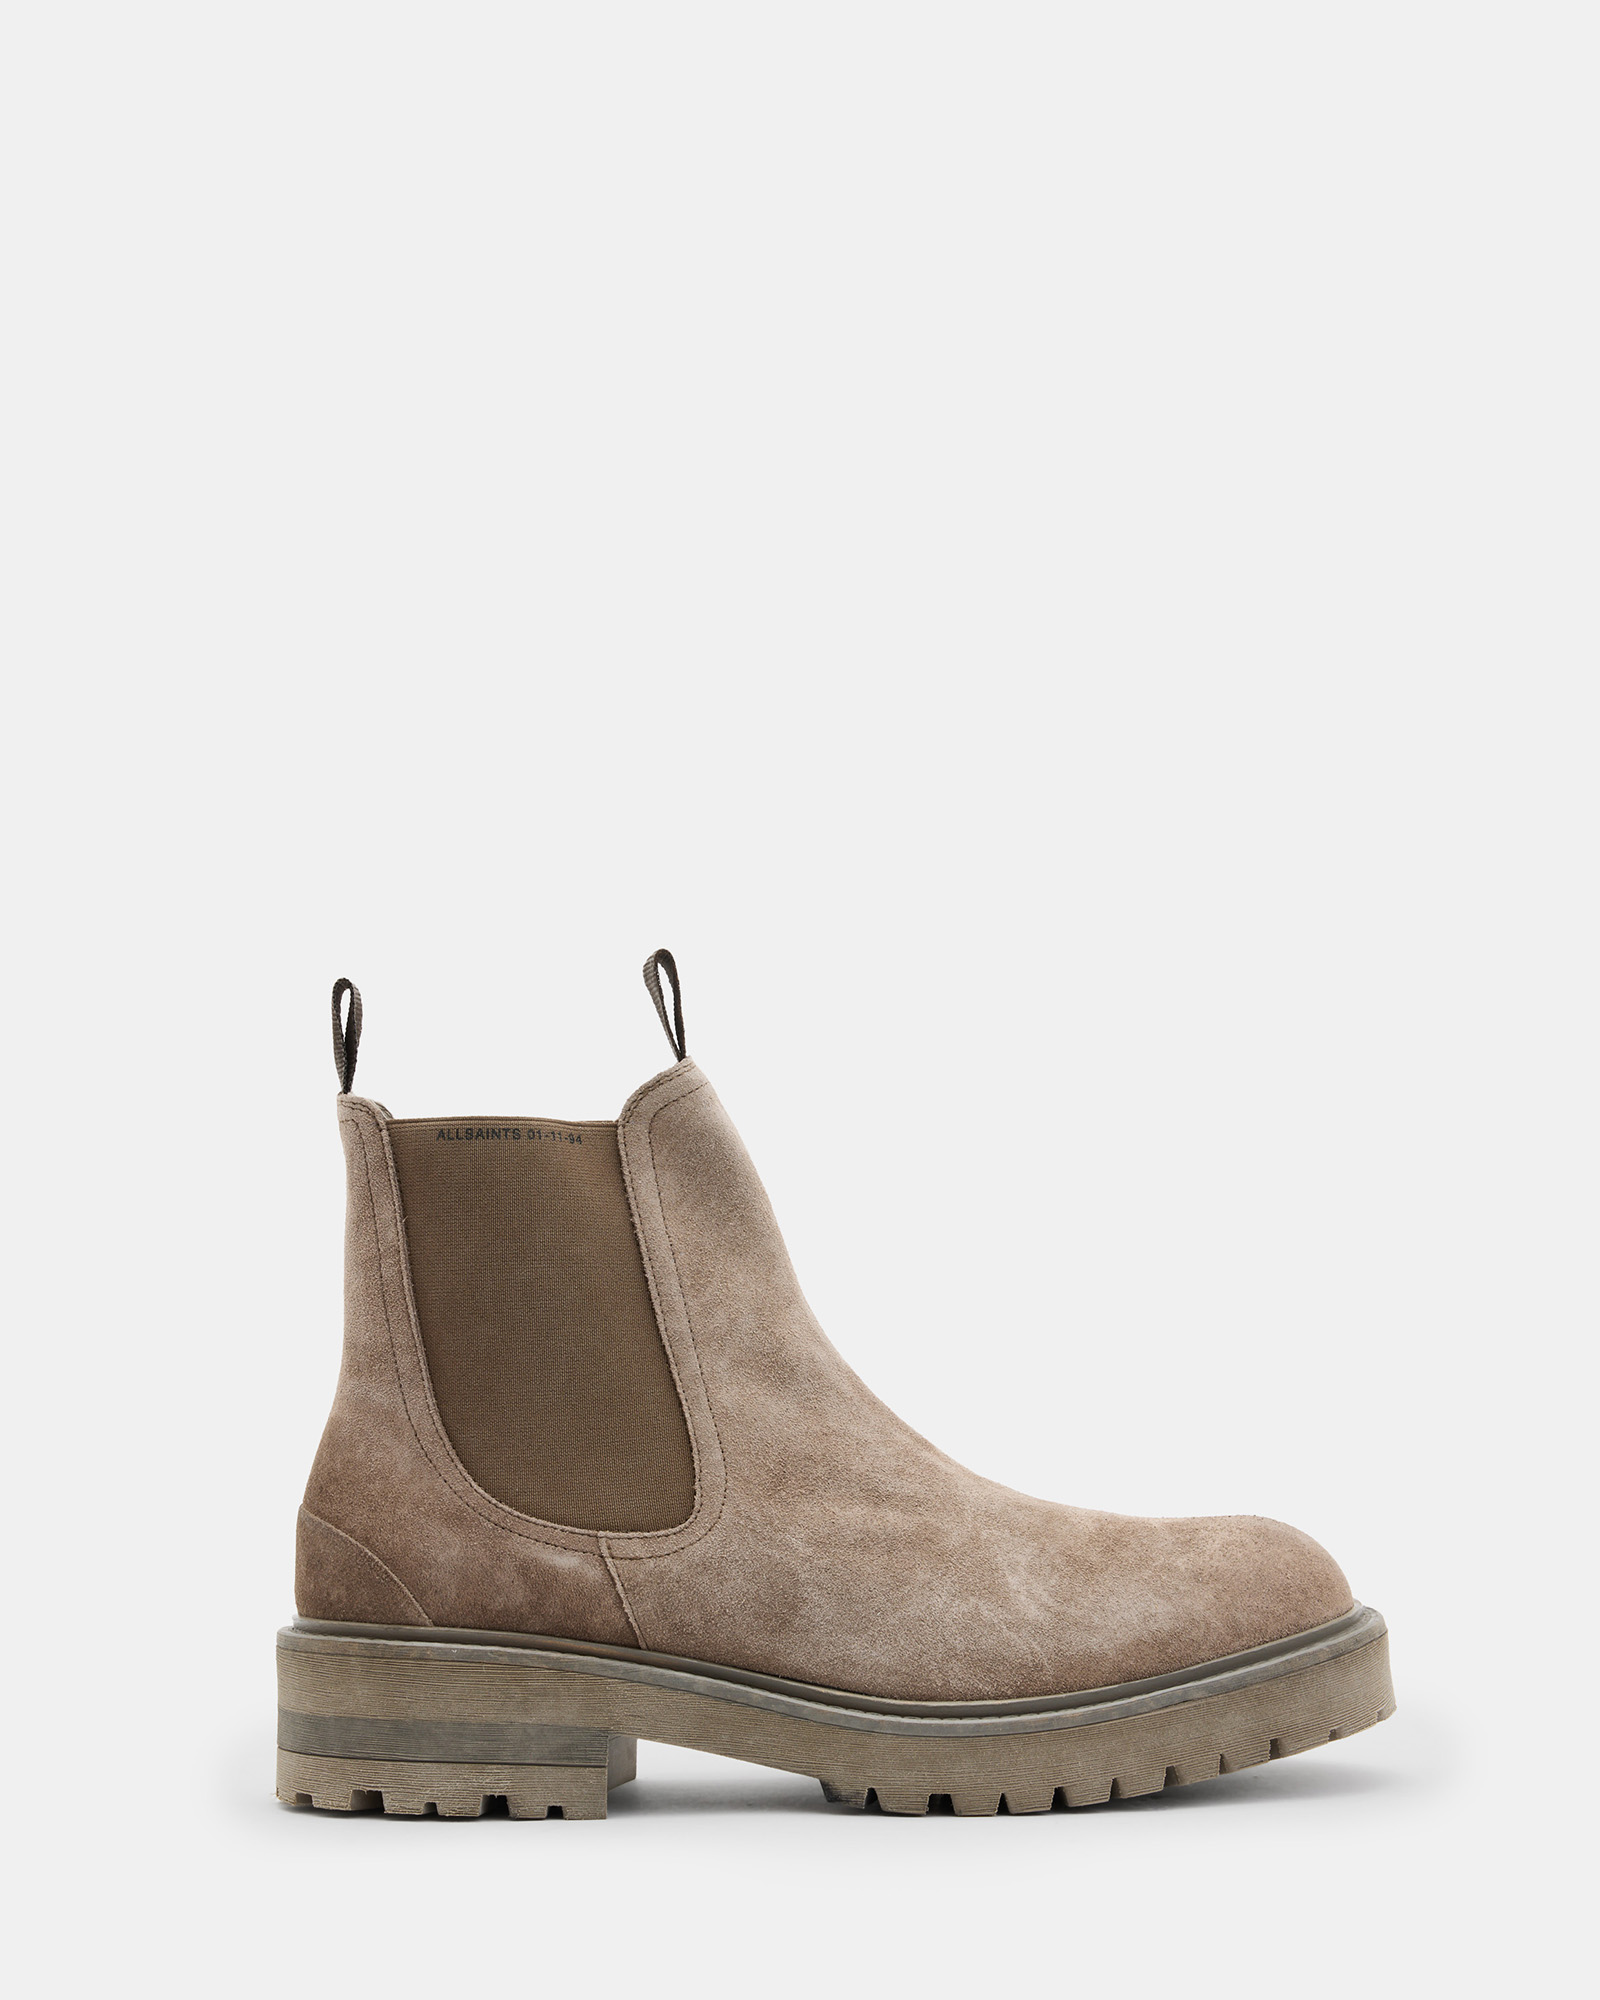 AllSaints Driver Suede Chelsea Boots,, Taupe